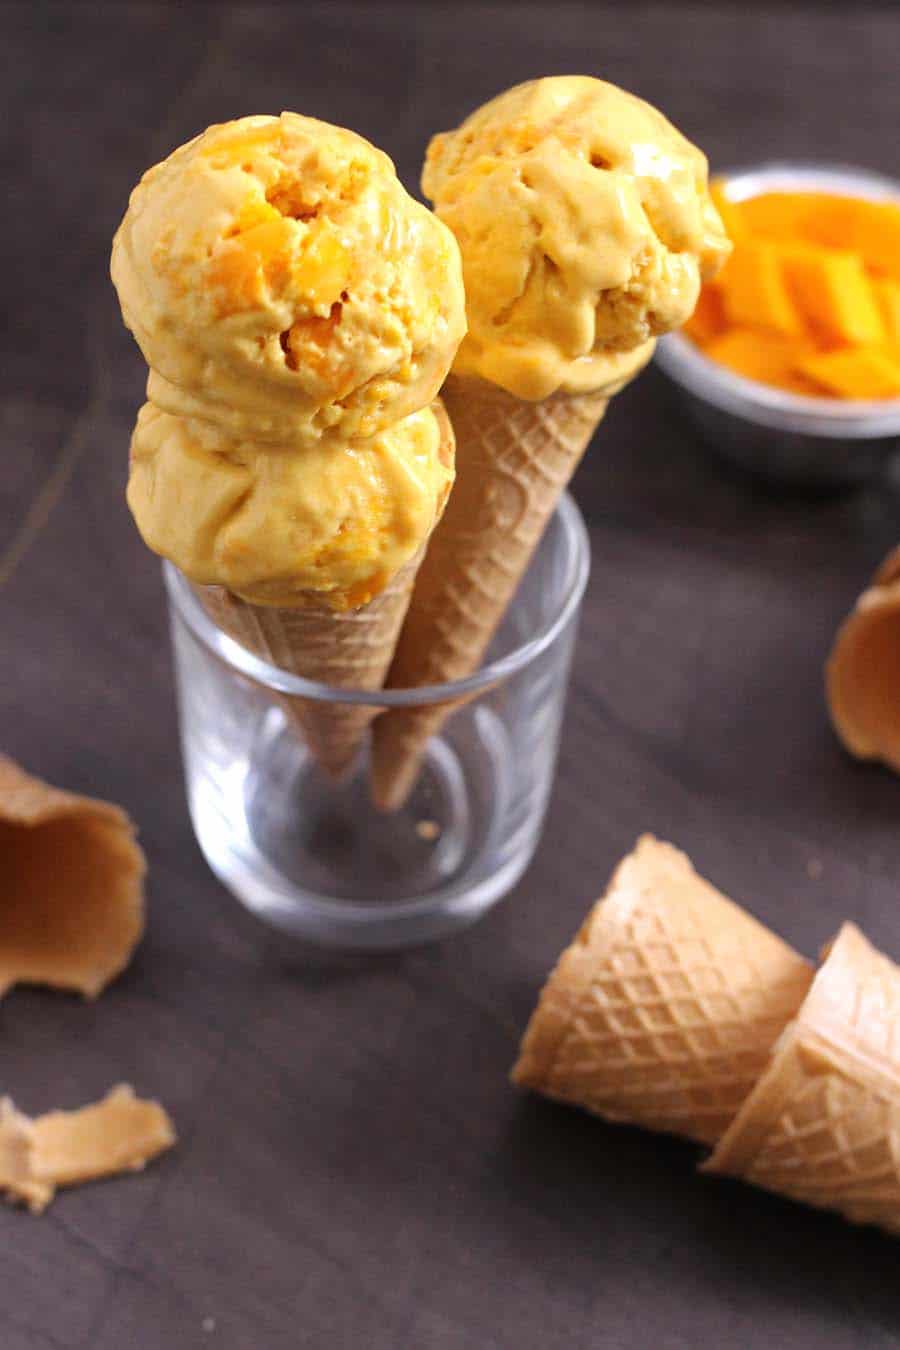 Homemade Mango Ice Cream | How to Make Mango Ice Cream, no churn ice cream, mexican mango ice cream, summer food recipes, summer desserts, no cooking recipes, best ice cream, mango coconut ice cream, mango recipes, fasting , upvas, vrat food, mango sorbet, no ice cream maker, mango mochi #icecream #mango #eggless #Nochurn #summerrecipes #indiansweets #indiandesserts